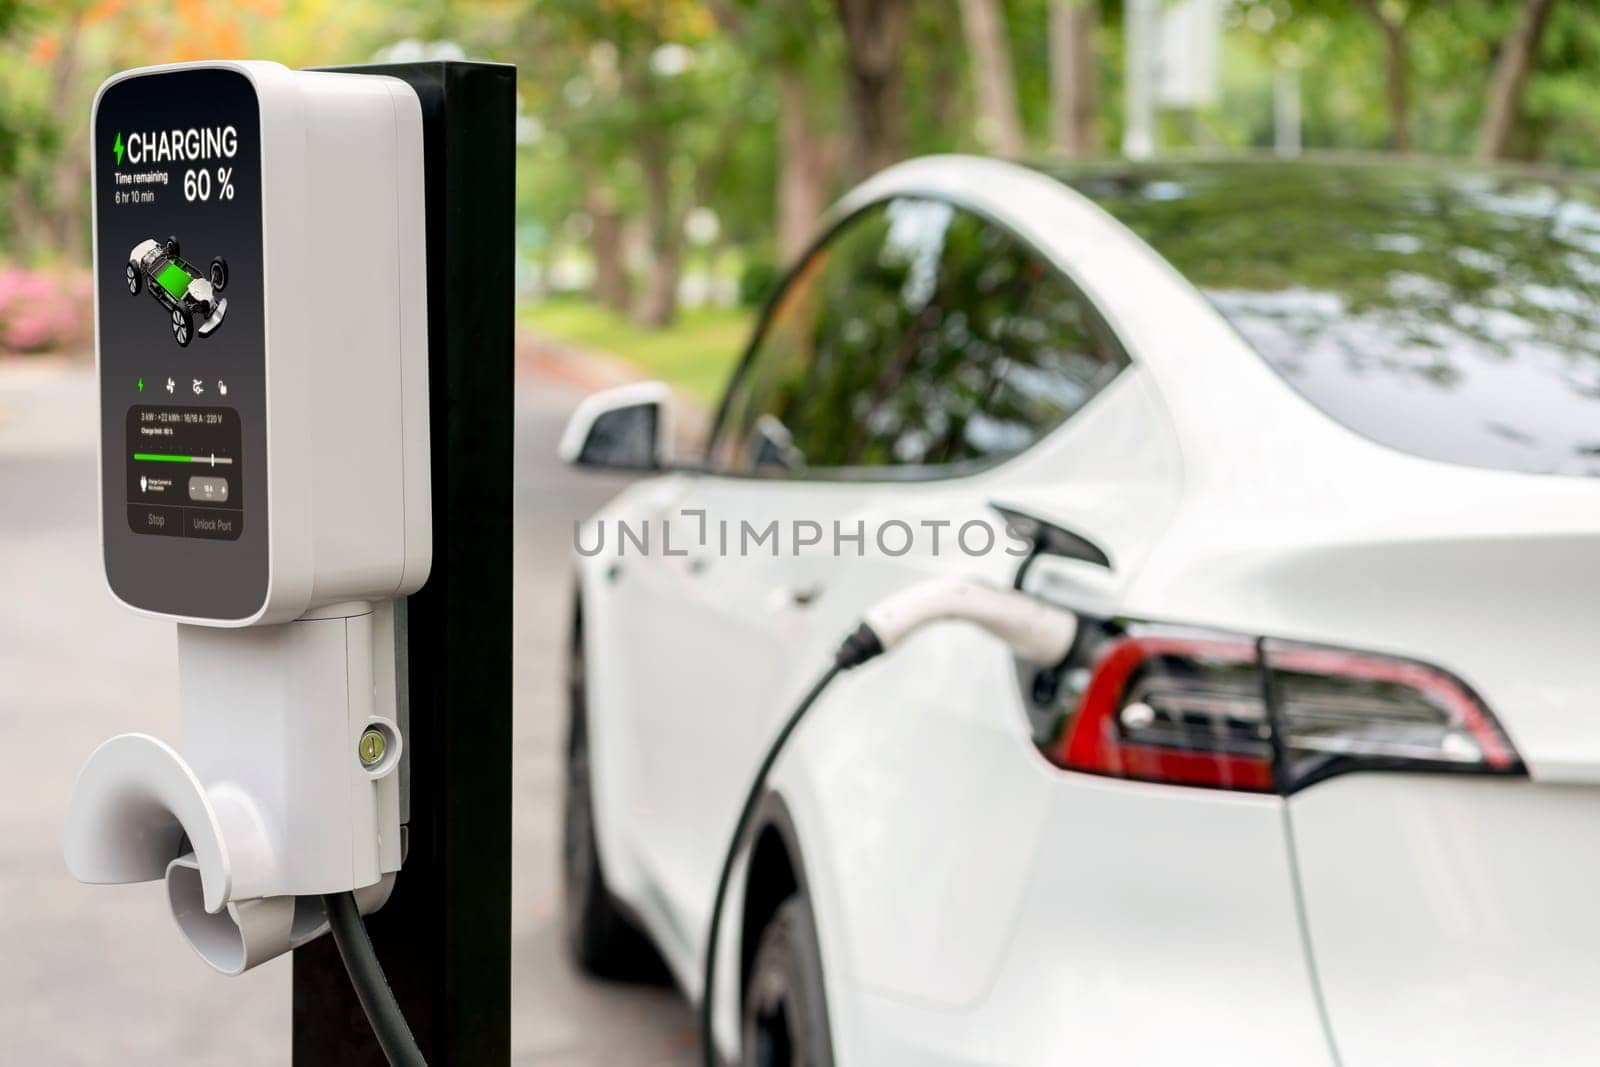 EV electric vehicle recharging battery in national park. Exalt by biancoblue